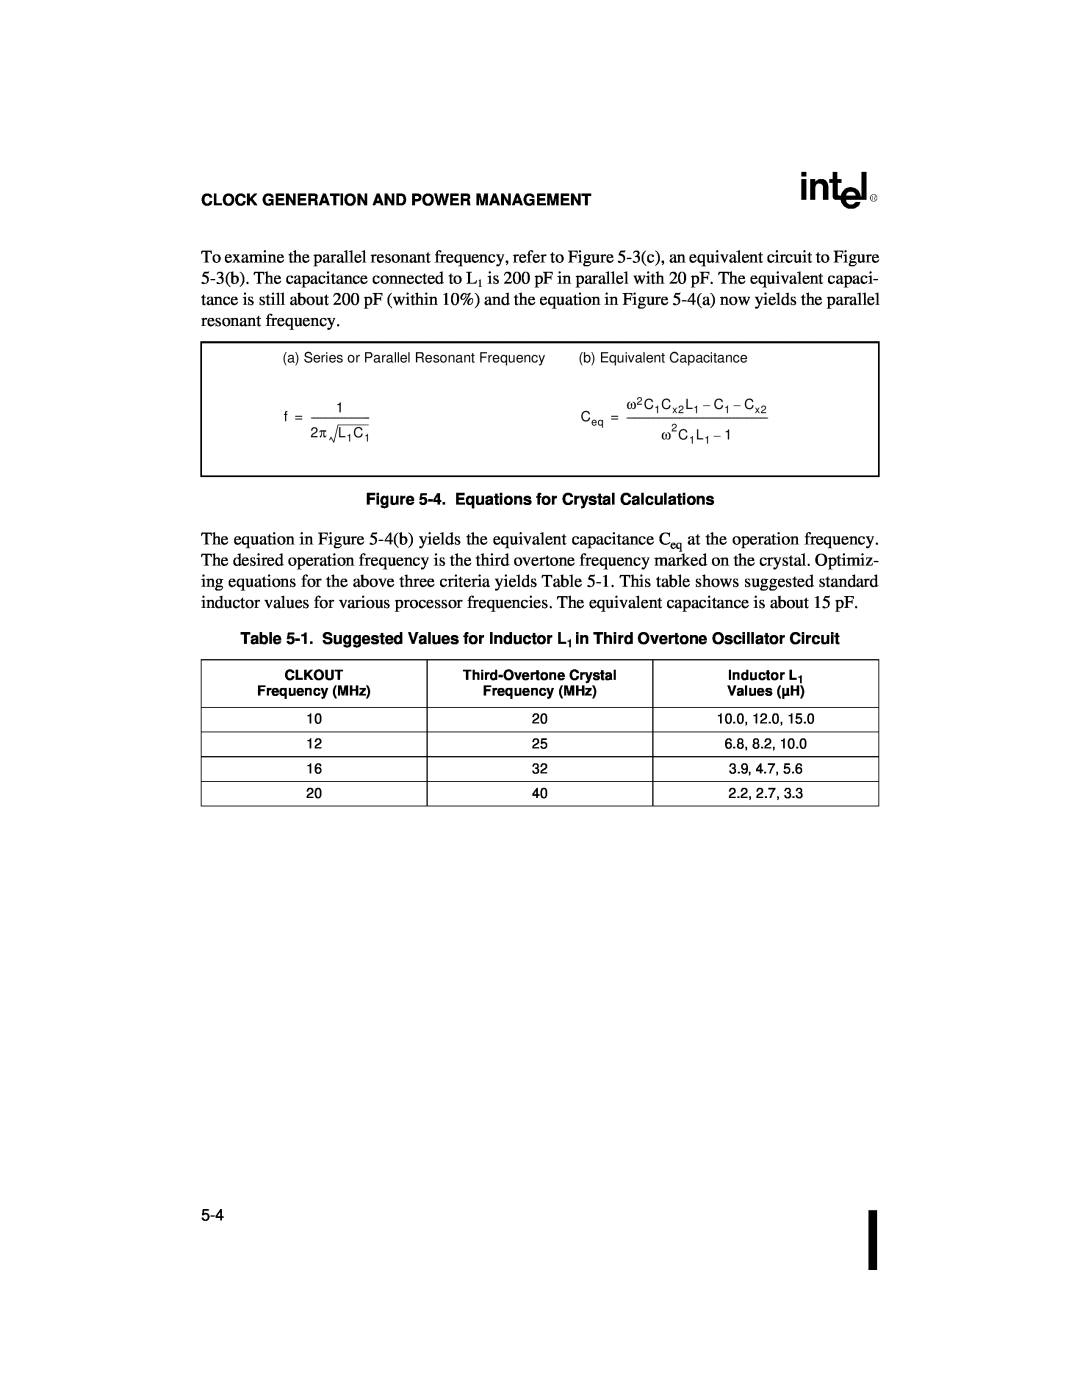 Intel 80C186XL Clock Generation And Power Management, 4.Equations for Crystal Calculations, Clkout, Third-OvertoneCrystal 